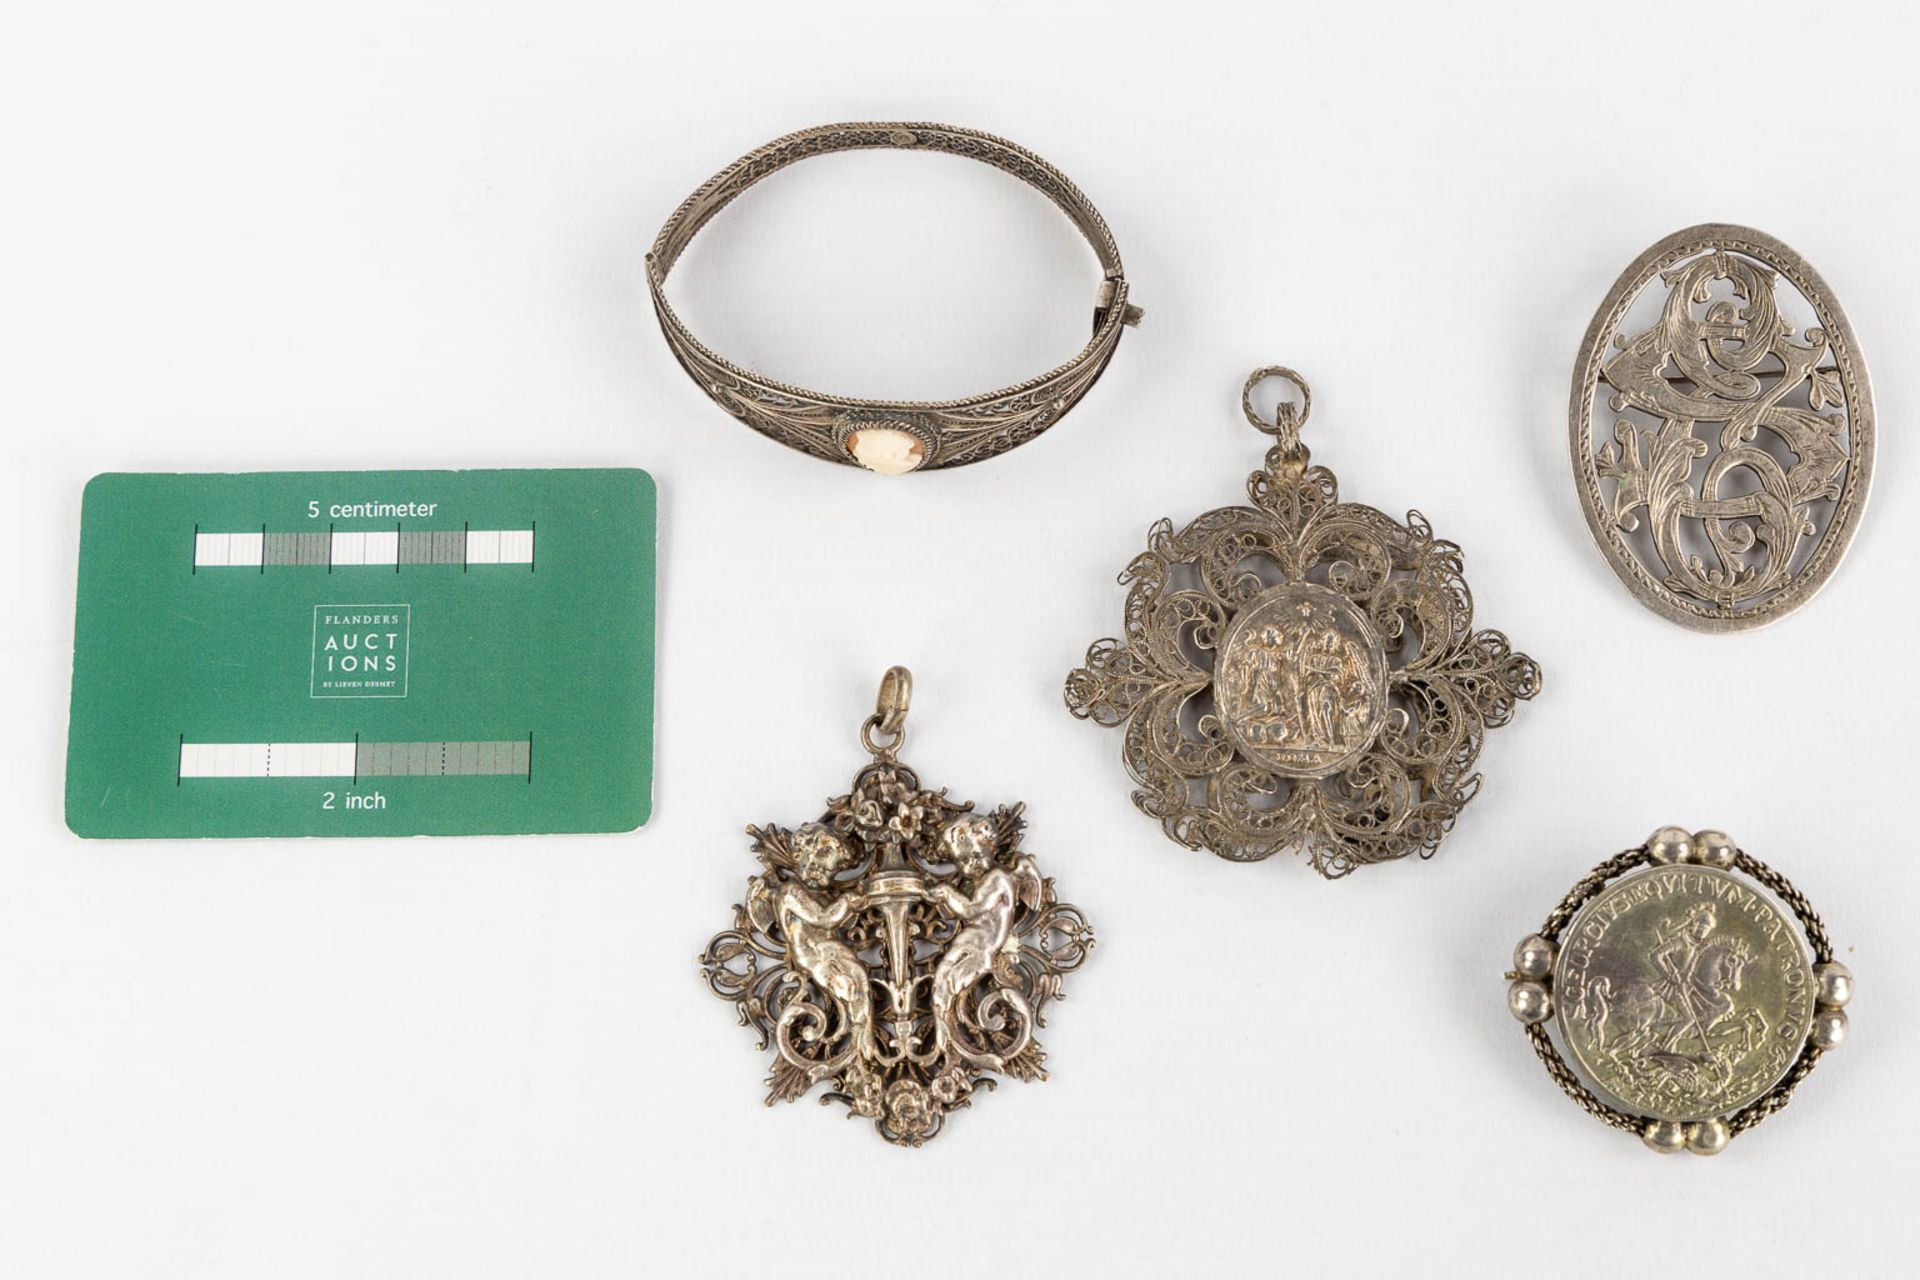 A collection of silver brooches, pendants and bracelets, Filigrane silver. 90g. (H:7 cm) - Image 2 of 8